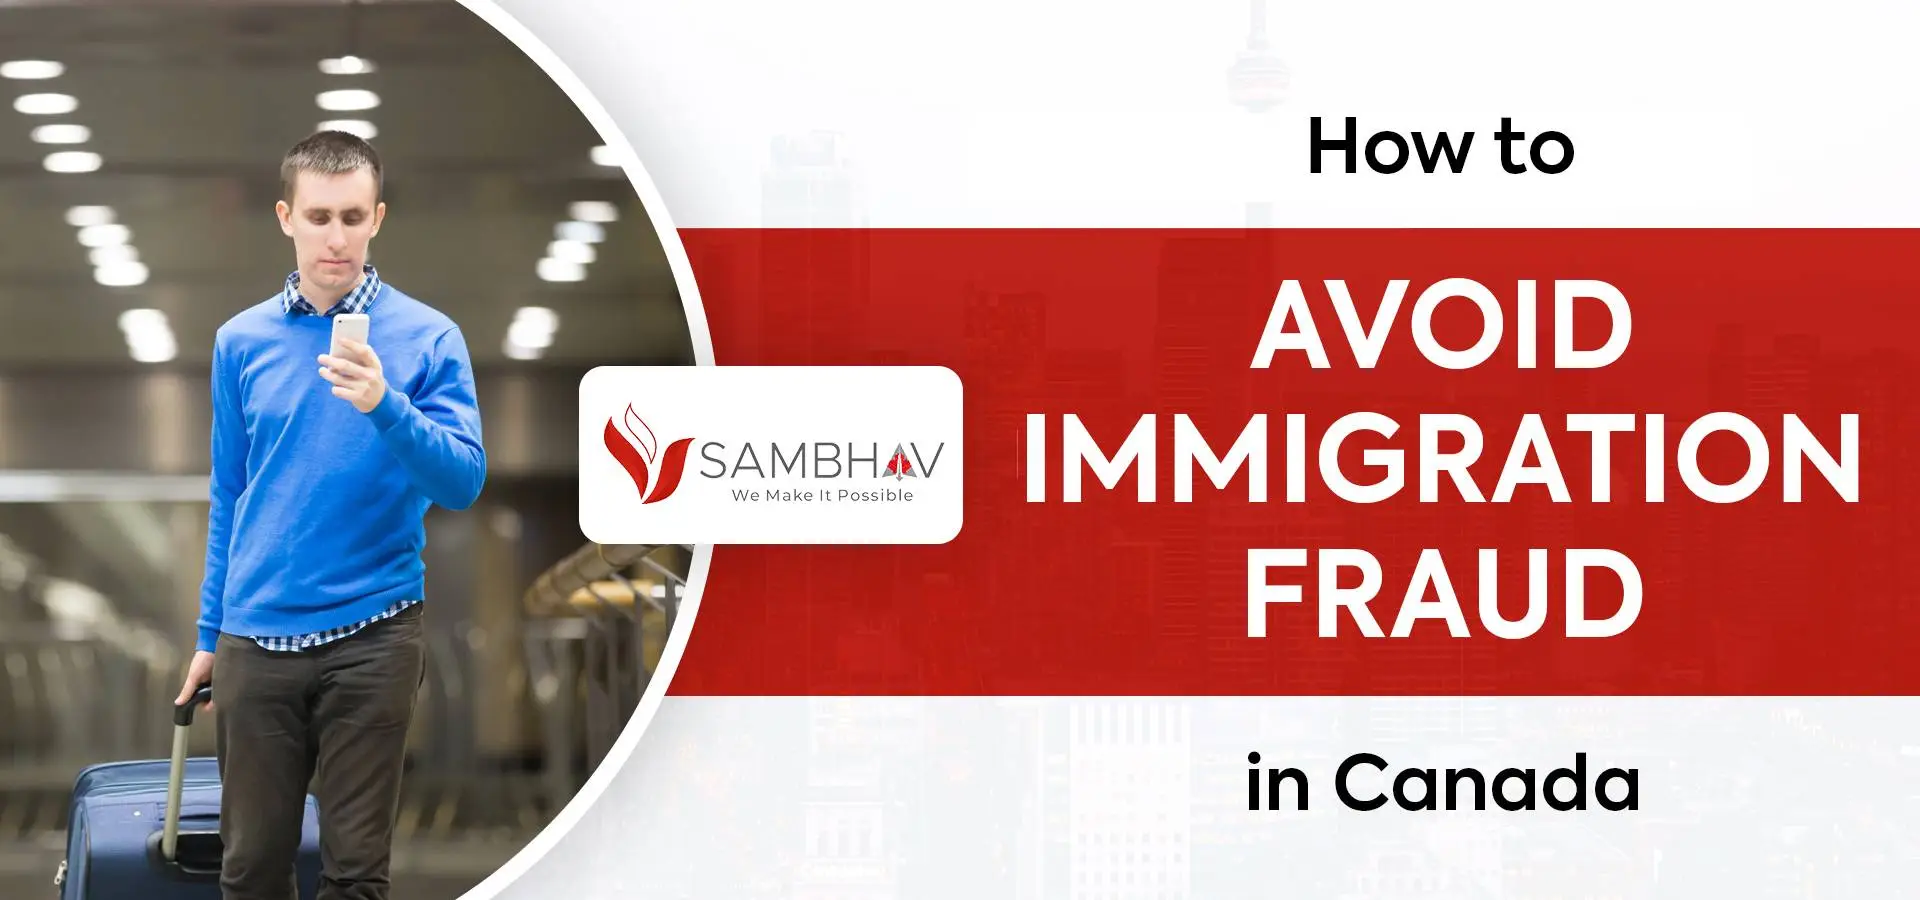 How to Avoid Immigration Fraud in Canada?